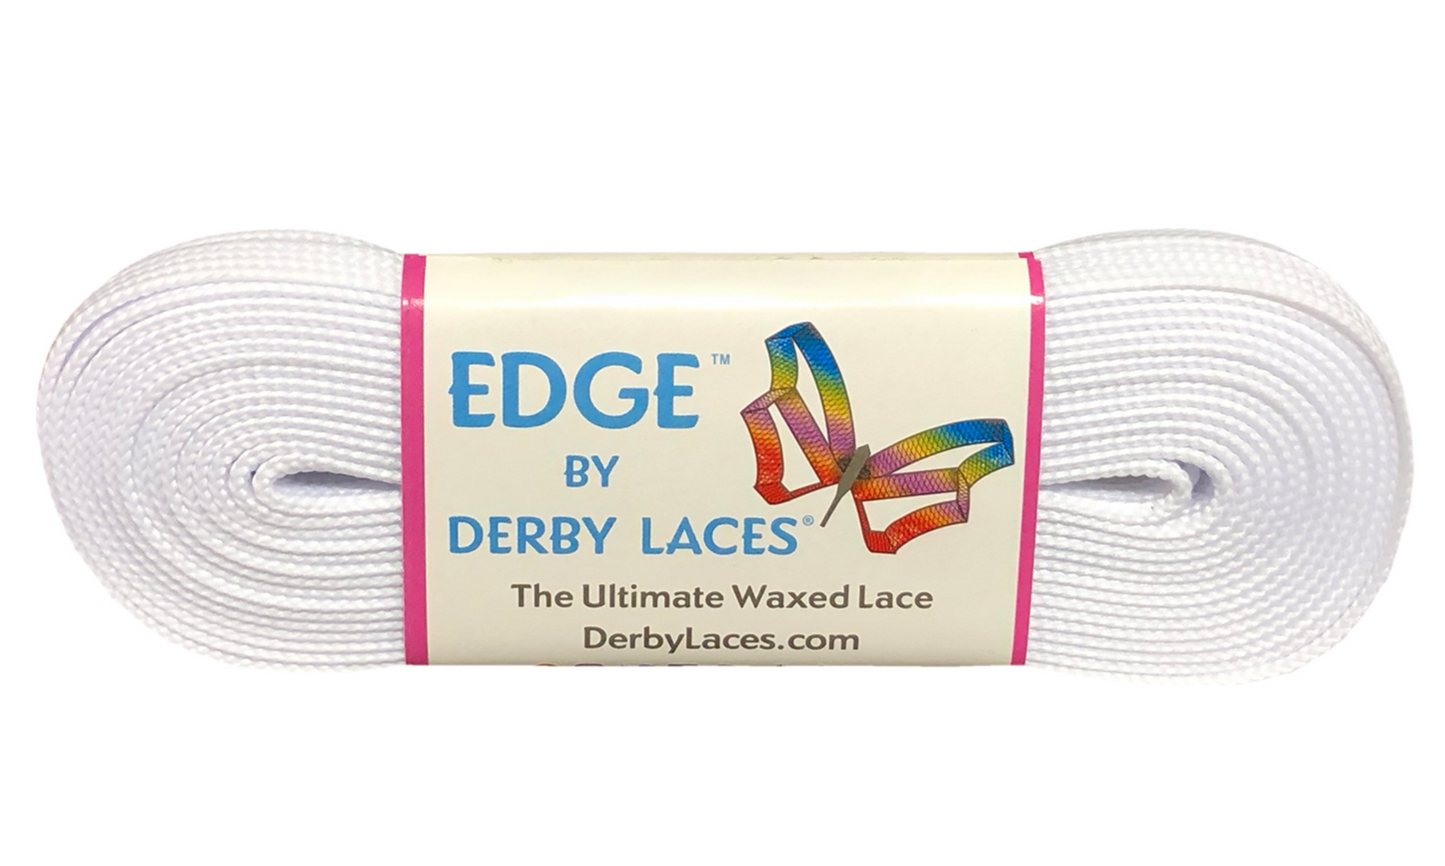 EDGE by Derby Laces